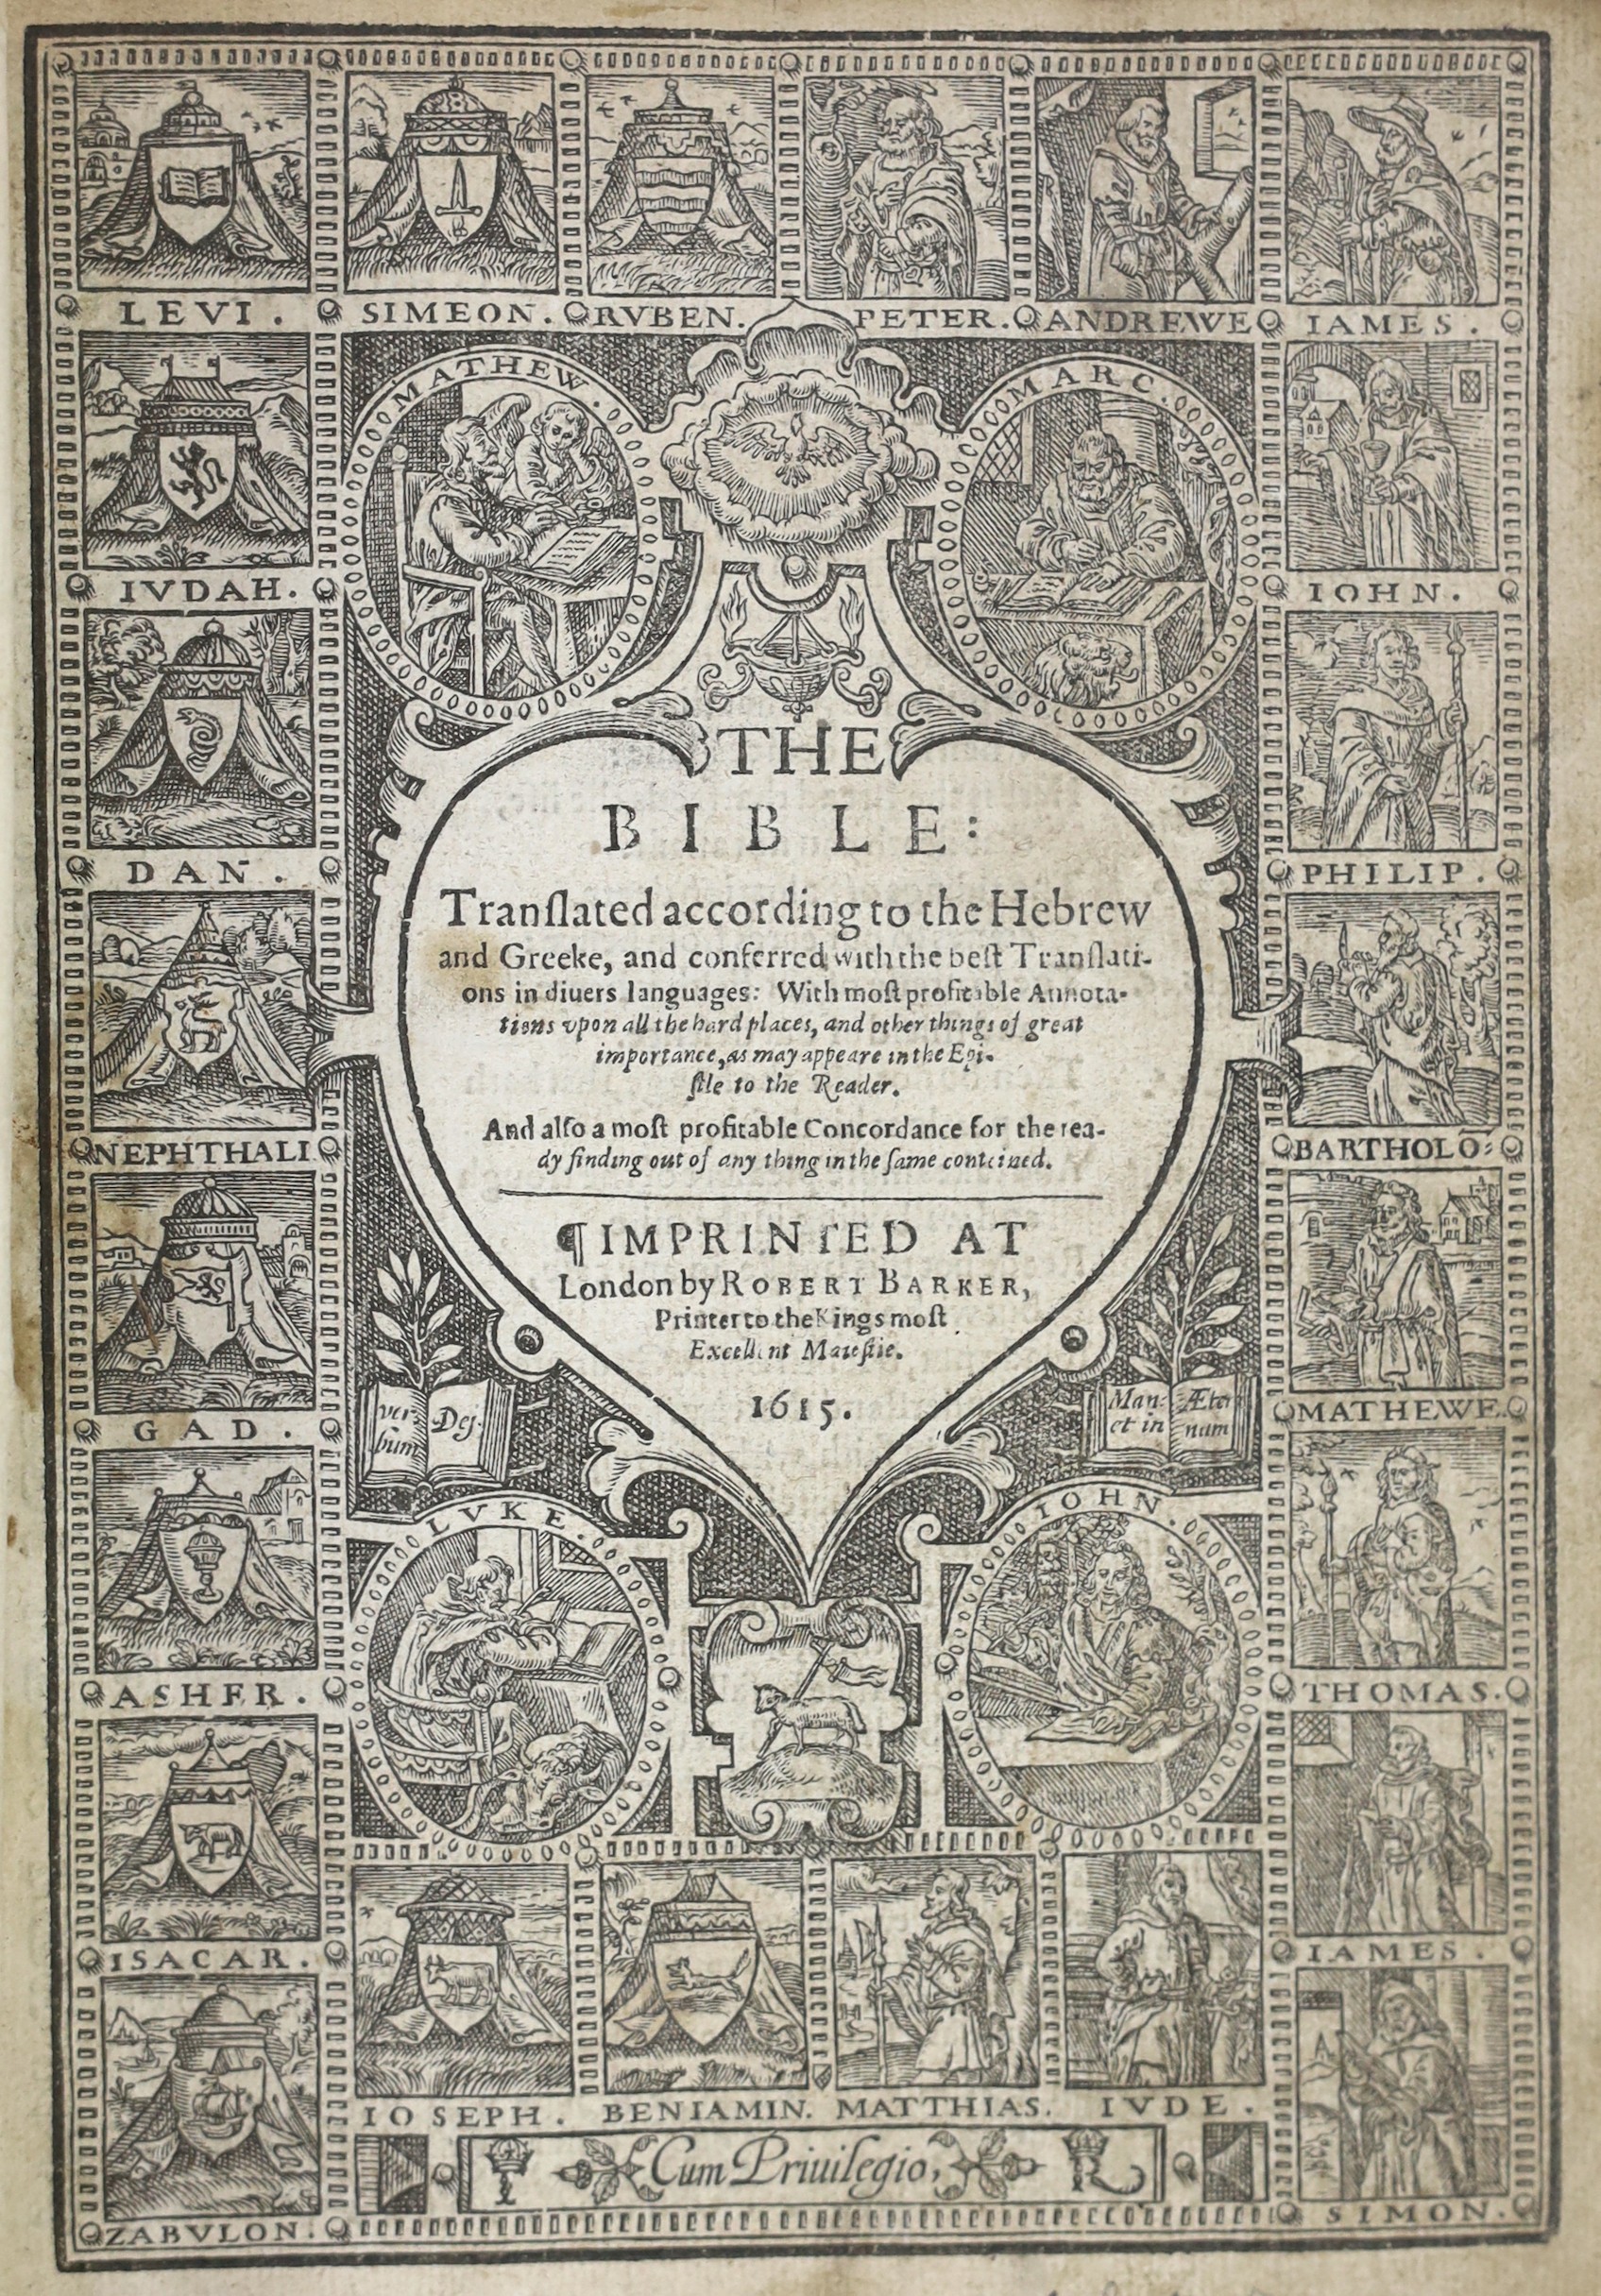 (The Bible - Geneva version, 1615) - The Bible: translated according to the Hebrew and Greeke, and conferred with the best translations in diverse languages...engraved pictorial titles (General and NT.), decorated initia